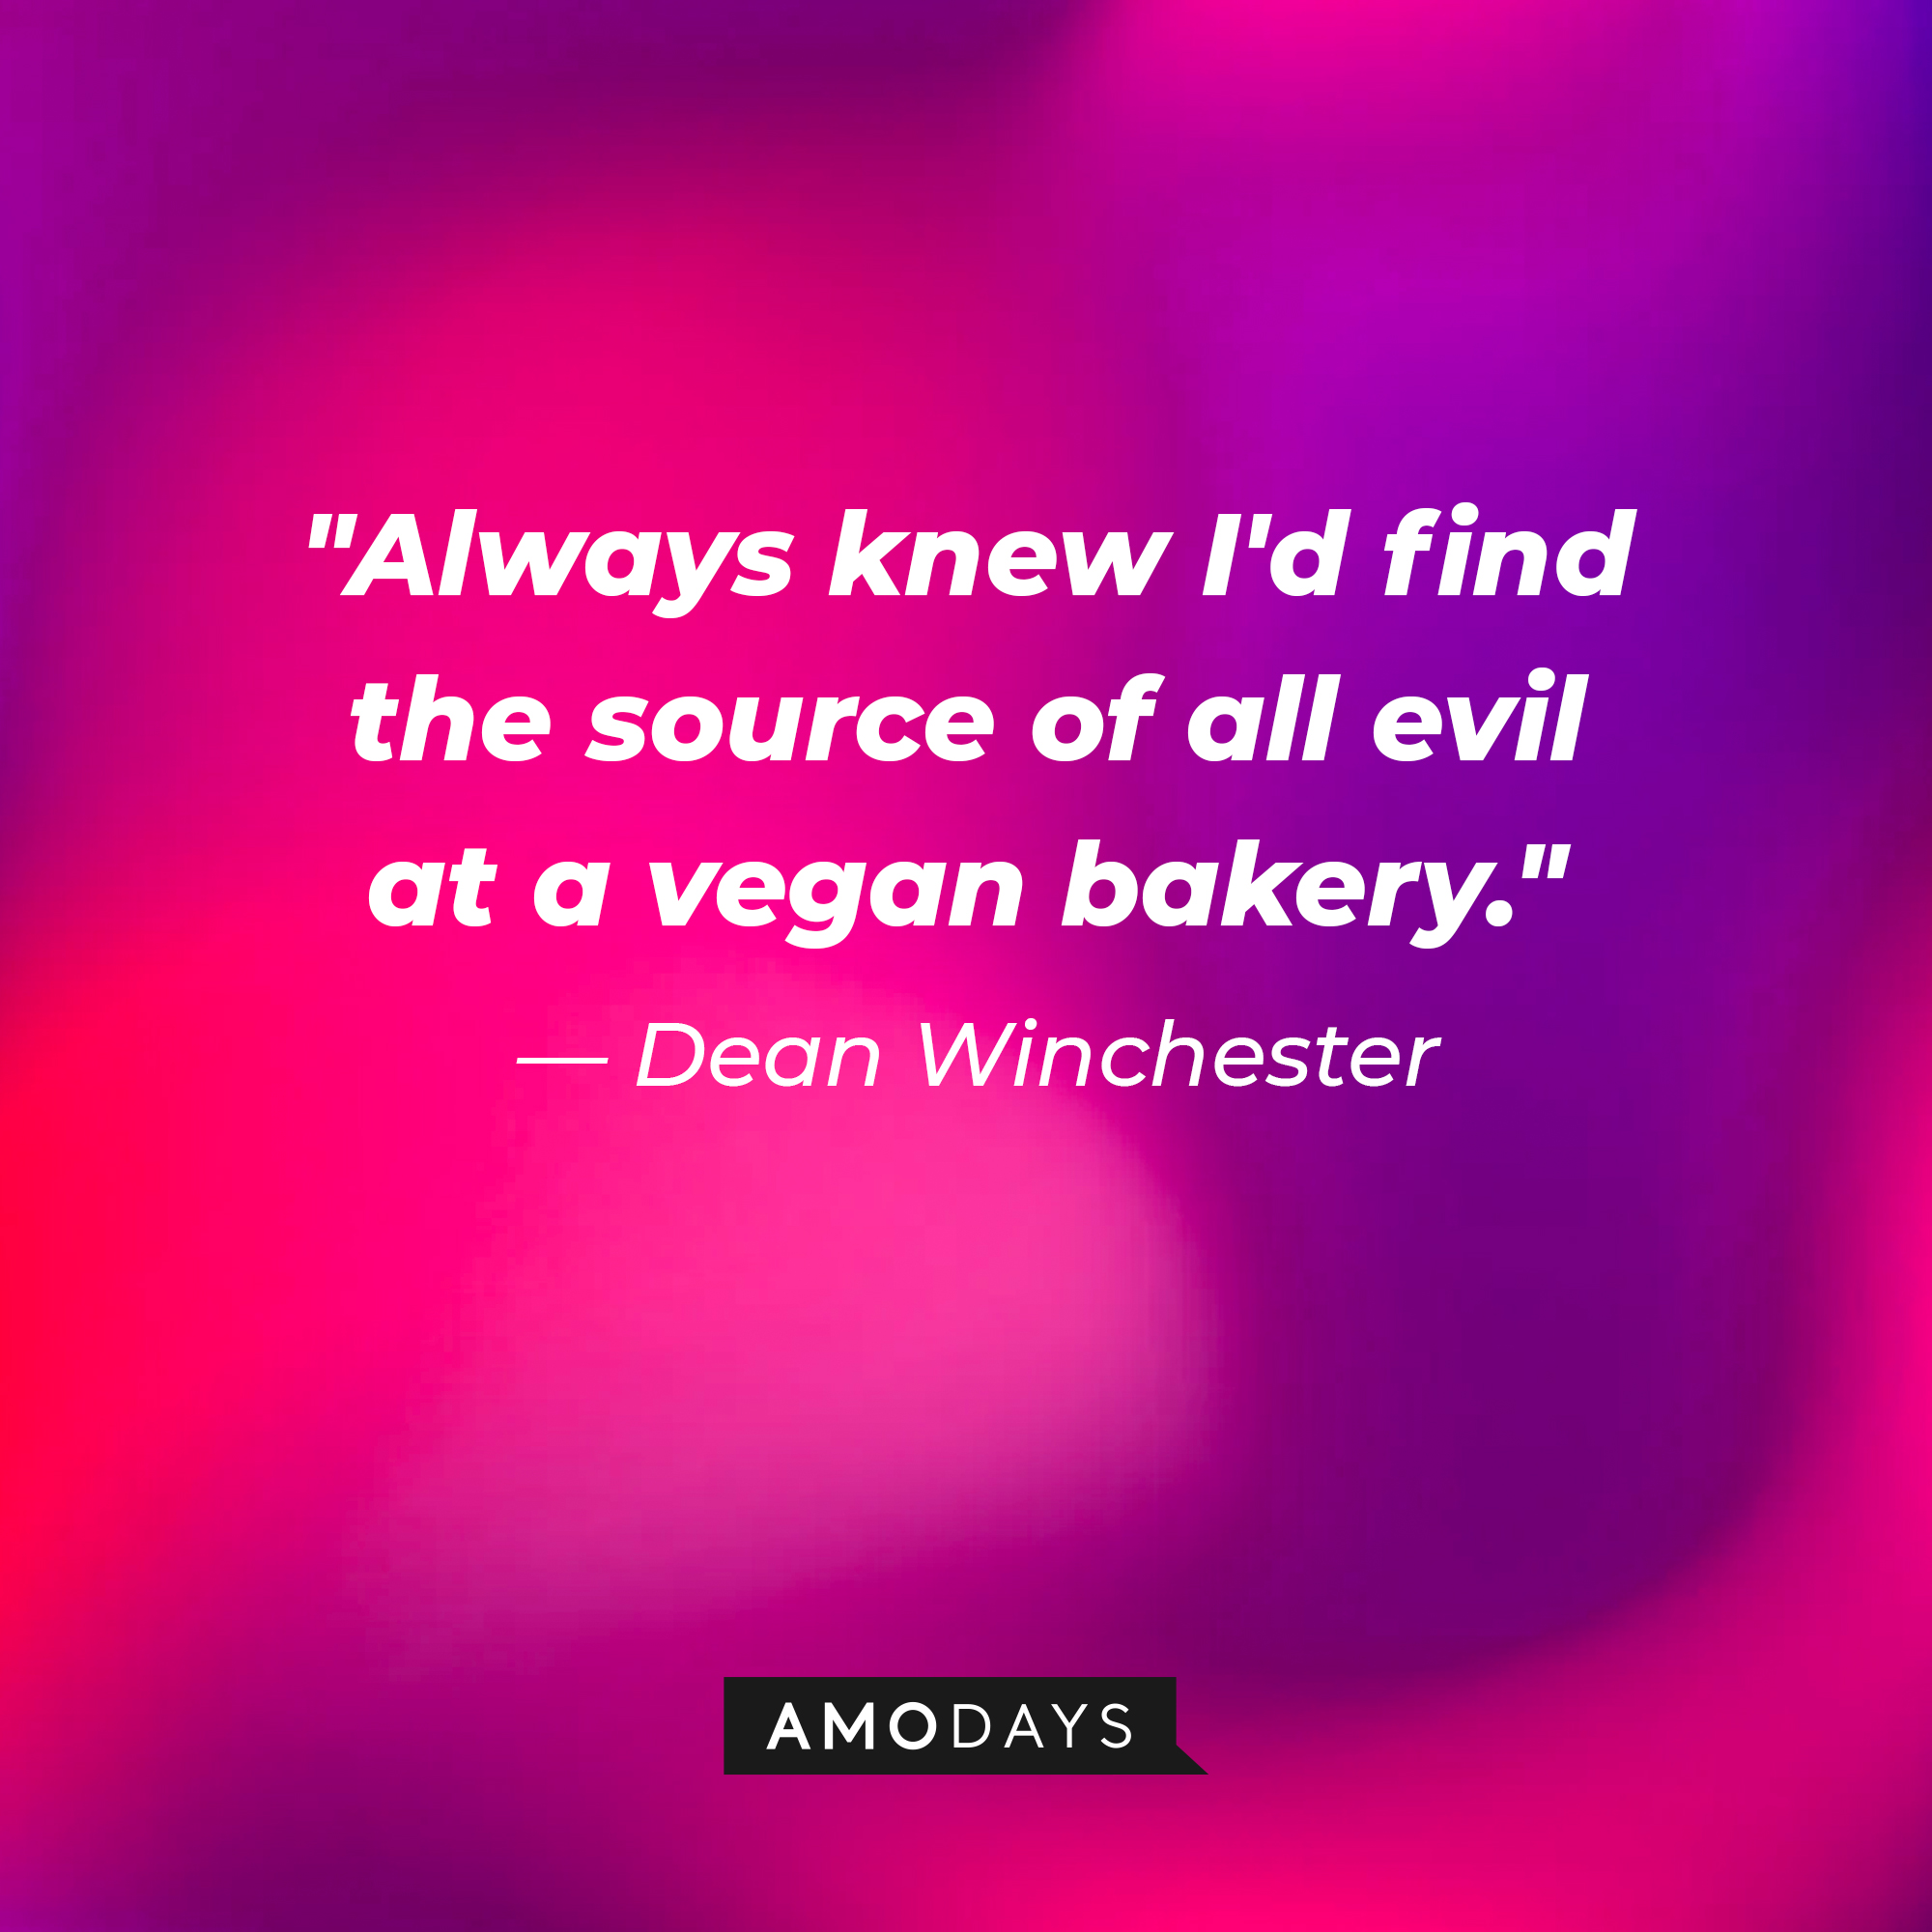 Dean Winchester's quote, "Always knew I'd find the source of all evil at a vegan bakery." | Source: Amodays